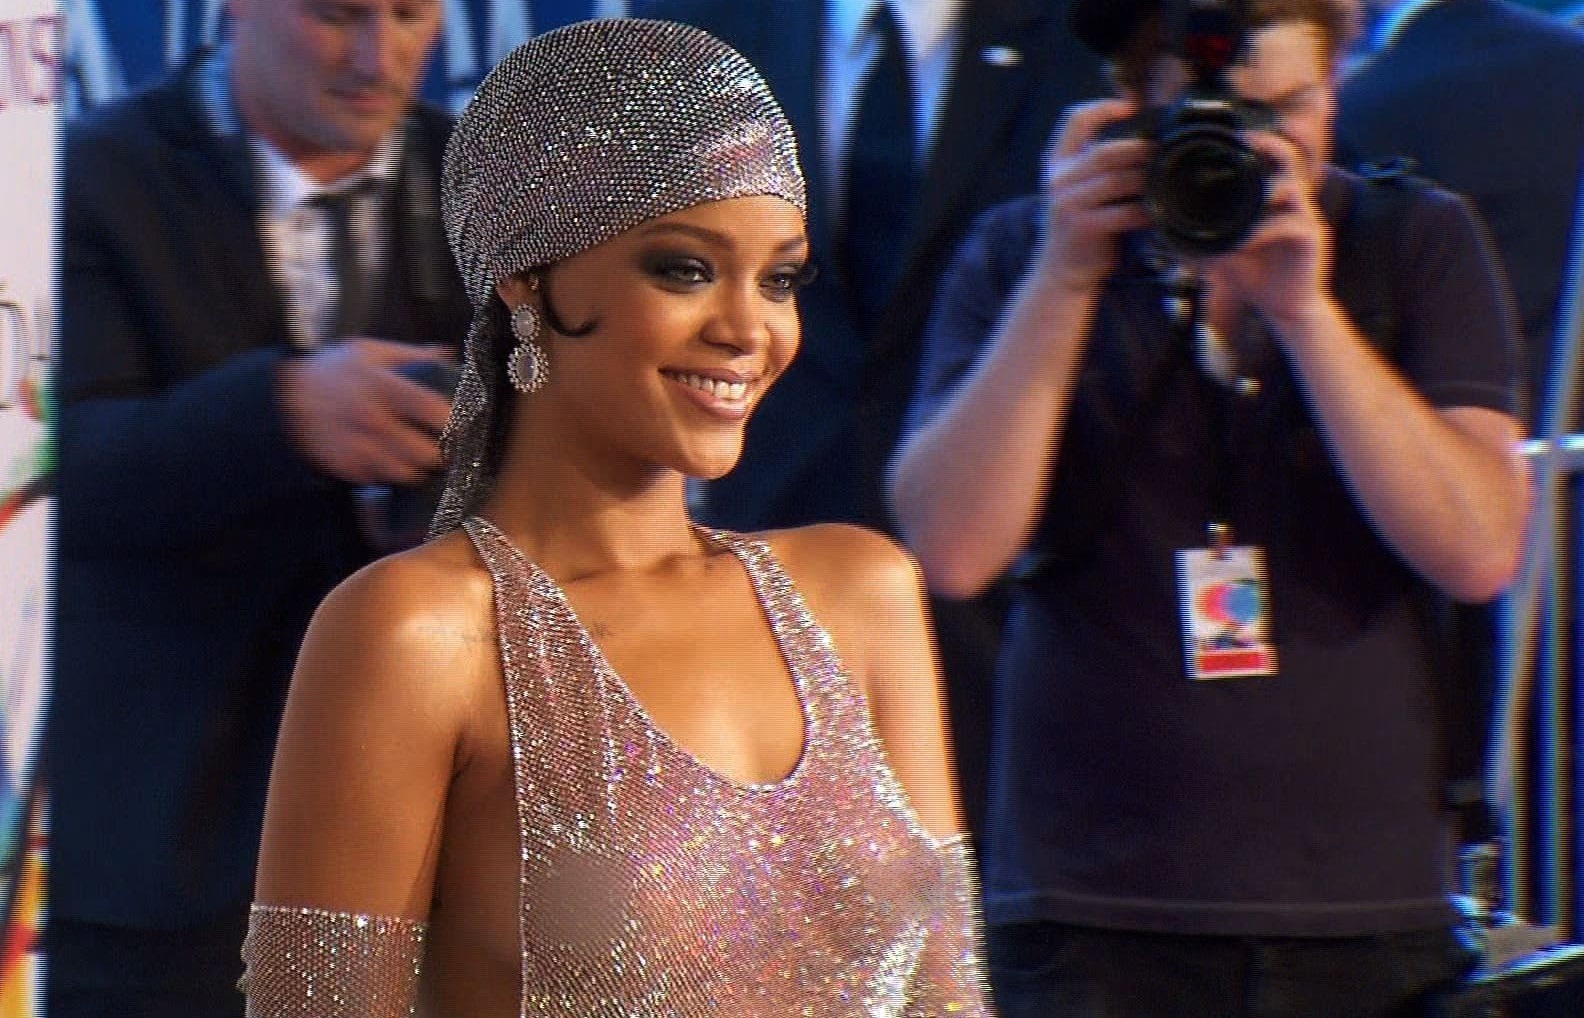 Rihanna named richest woman in music by Forbes